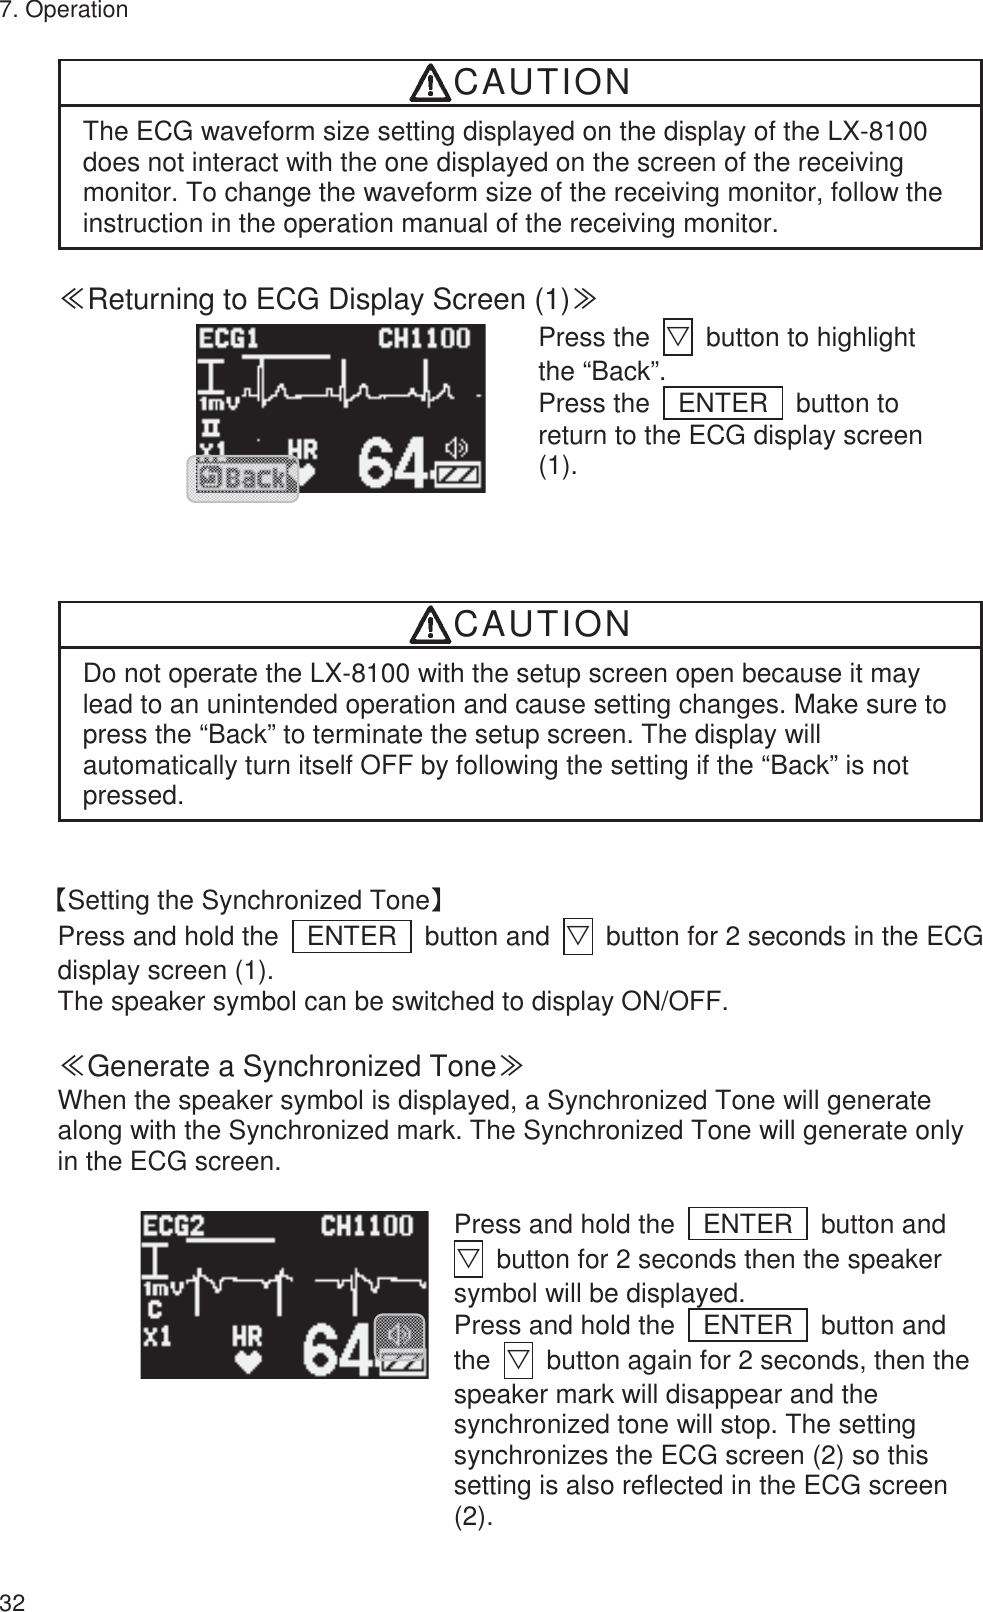 7. Operation 32 CAUTION The ECG waveform size setting displayed on the display of the LX-8100 does not interact with the one displayed on the screen of the receiving monitor. To change the waveform size of the receiving monitor, follow the instruction in the operation manual of the receiving monitor.  䍾Returning to ECG Display Screen (1)䍿        Press the  ť  button to highlight the “Back”. Press the  ENTER  button to return to the ECG display screen (1). CAUTION Do not operate the LX-8100 with the setup screen open because it may lead to an unintended operation and cause setting changes. Make sure to press the “Back” to terminate the setup screen. The display will automatically turn itself OFF by following the setting if the “Back” is not pressed.   ࠙Setting the Synchronized Toneࠚ Press and hold the    ENTER    button and  ť  button for 2 seconds in the ECG display screen (1). The speaker symbol can be switched to display ON/OFF.  䍾Generate a Synchronized Tone䍿 When the speaker symbol is displayed, a Synchronized Tone will generate along with the Synchronized mark. The Synchronized Tone will generate only in the ECG screen.          Press and hold the    ENTER    button and ť  button for 2 seconds then the speaker symbol will be displayed. Press and hold the    ENTER    button and the  ť  button again for 2 seconds, then the speaker mark will disappear and the synchronized tone will stop. The setting synchronizes the ECG screen (2) so this setting is also reflected in the ECG screen (2). 